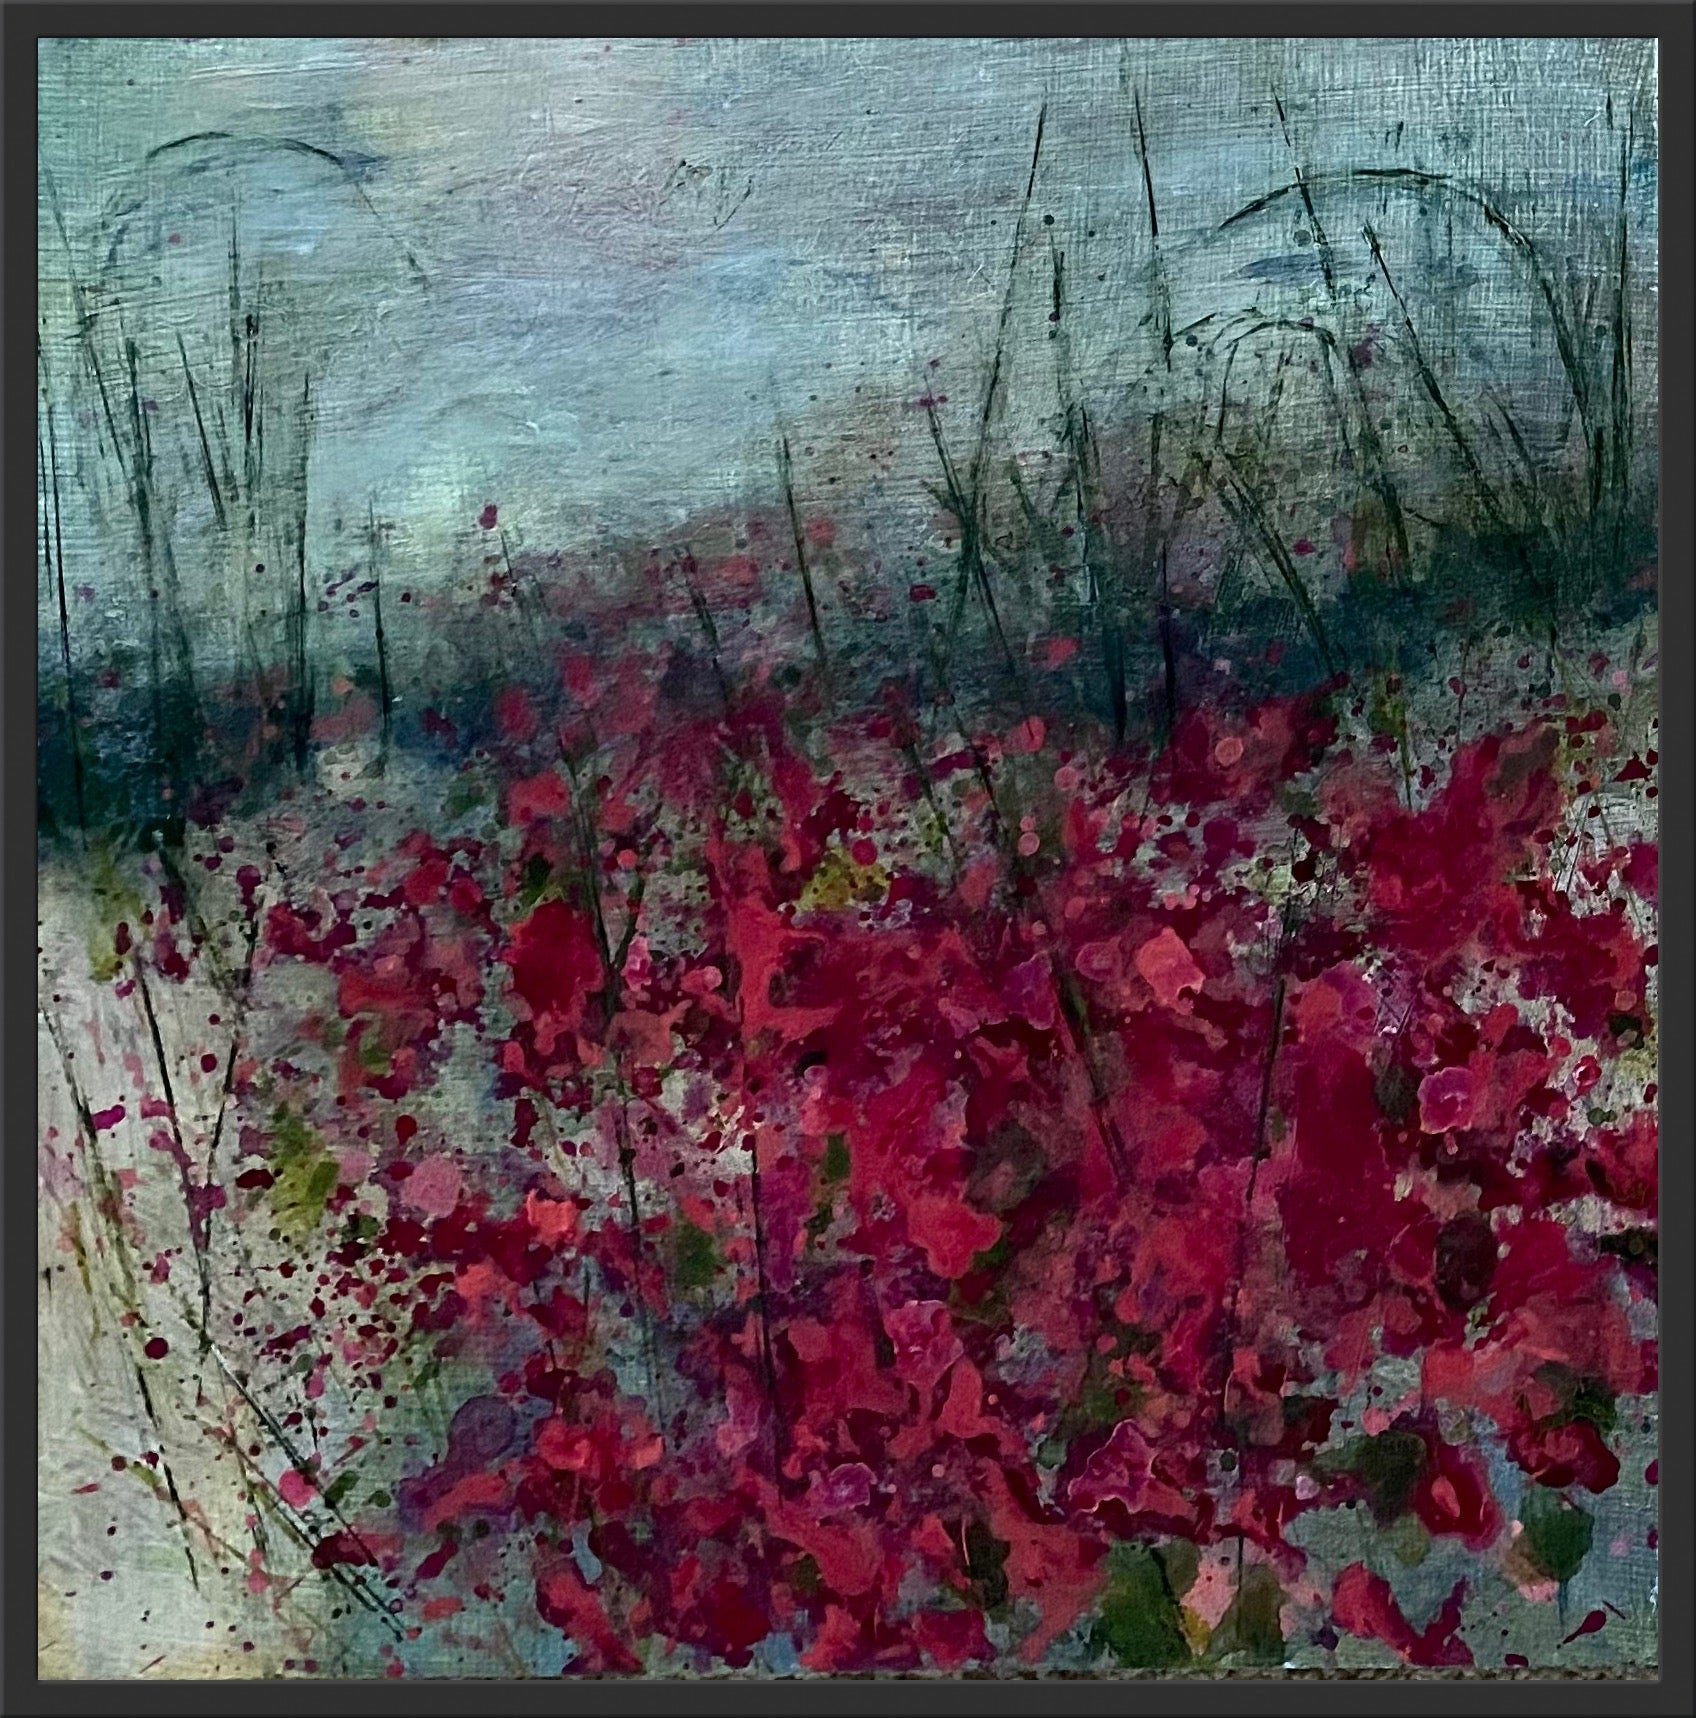 Red floral impressionist acrylic painting. Original art size 12 x 12 inches.with frame.